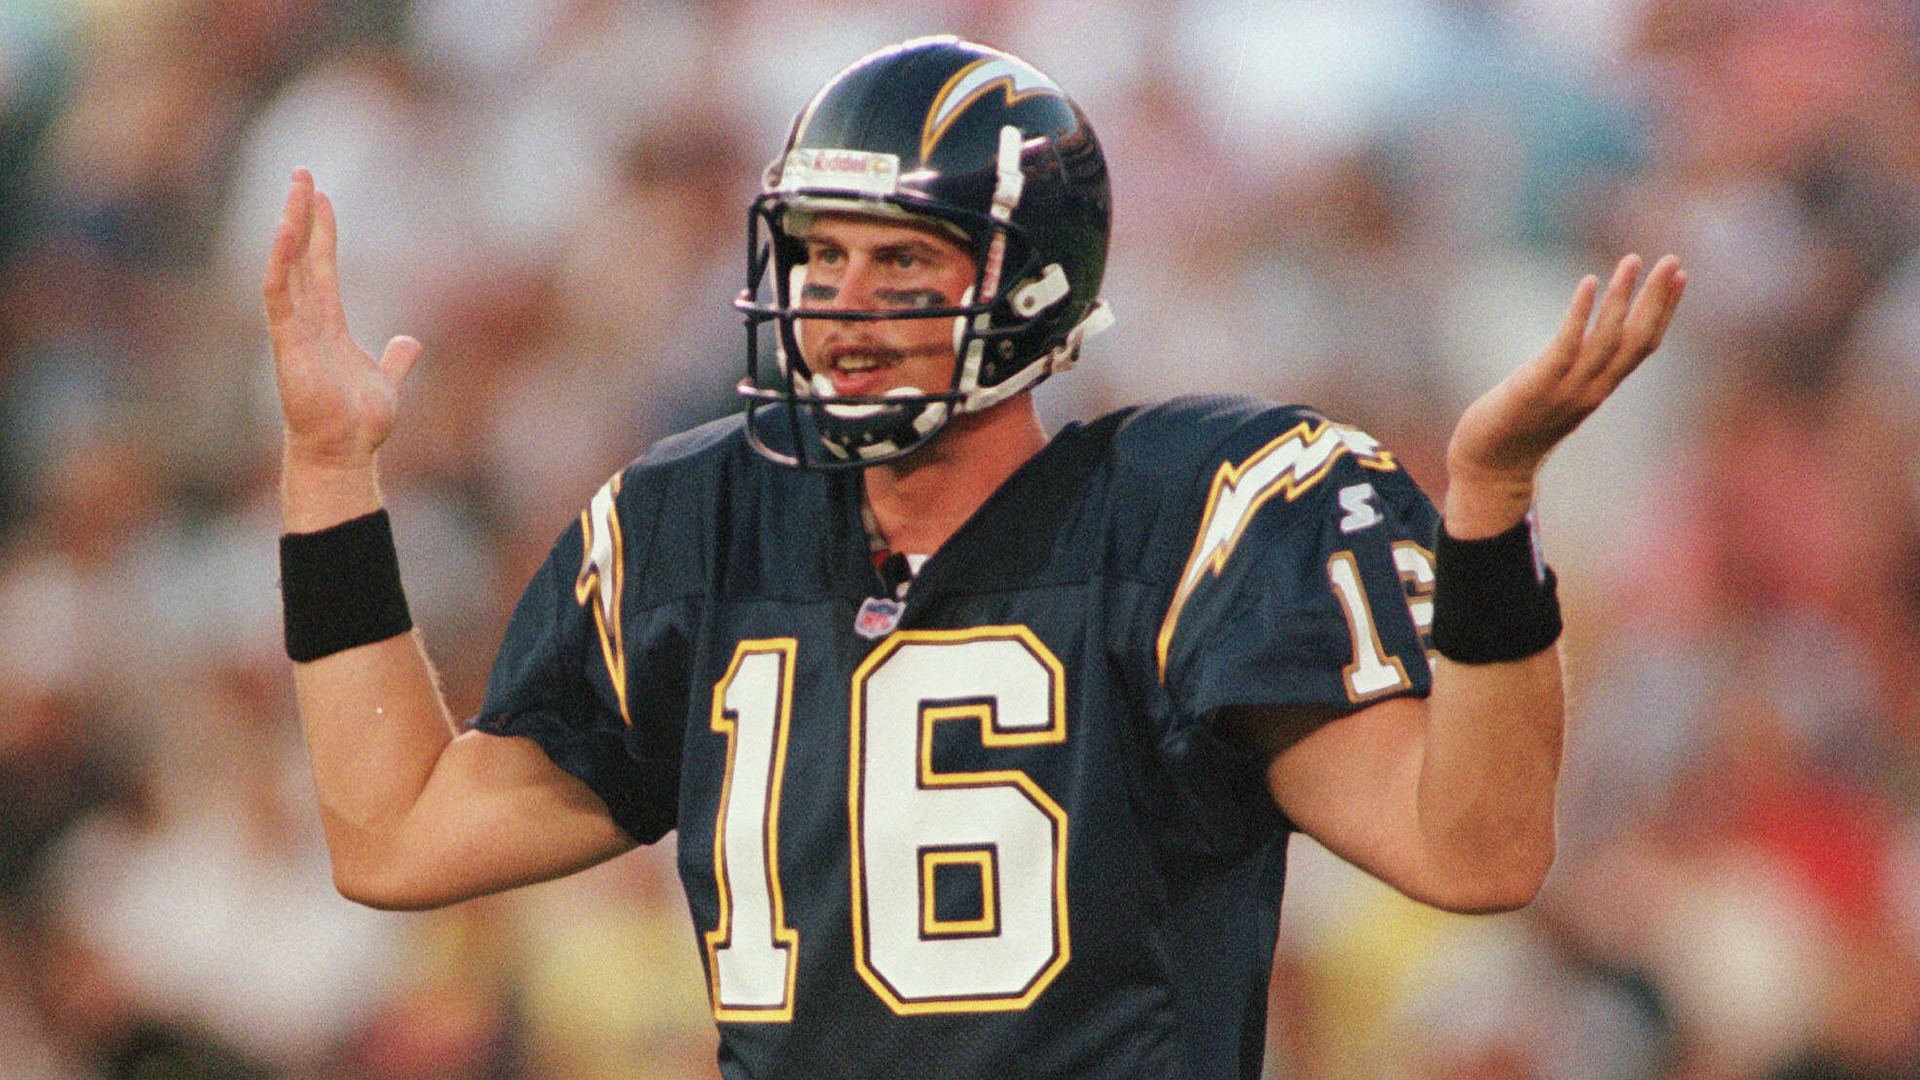 From Ryan Leaf to Tim Couch to Brian Bosworth -- 'The Boz,' here are 10 of the biggest busts in NFL Draft history.